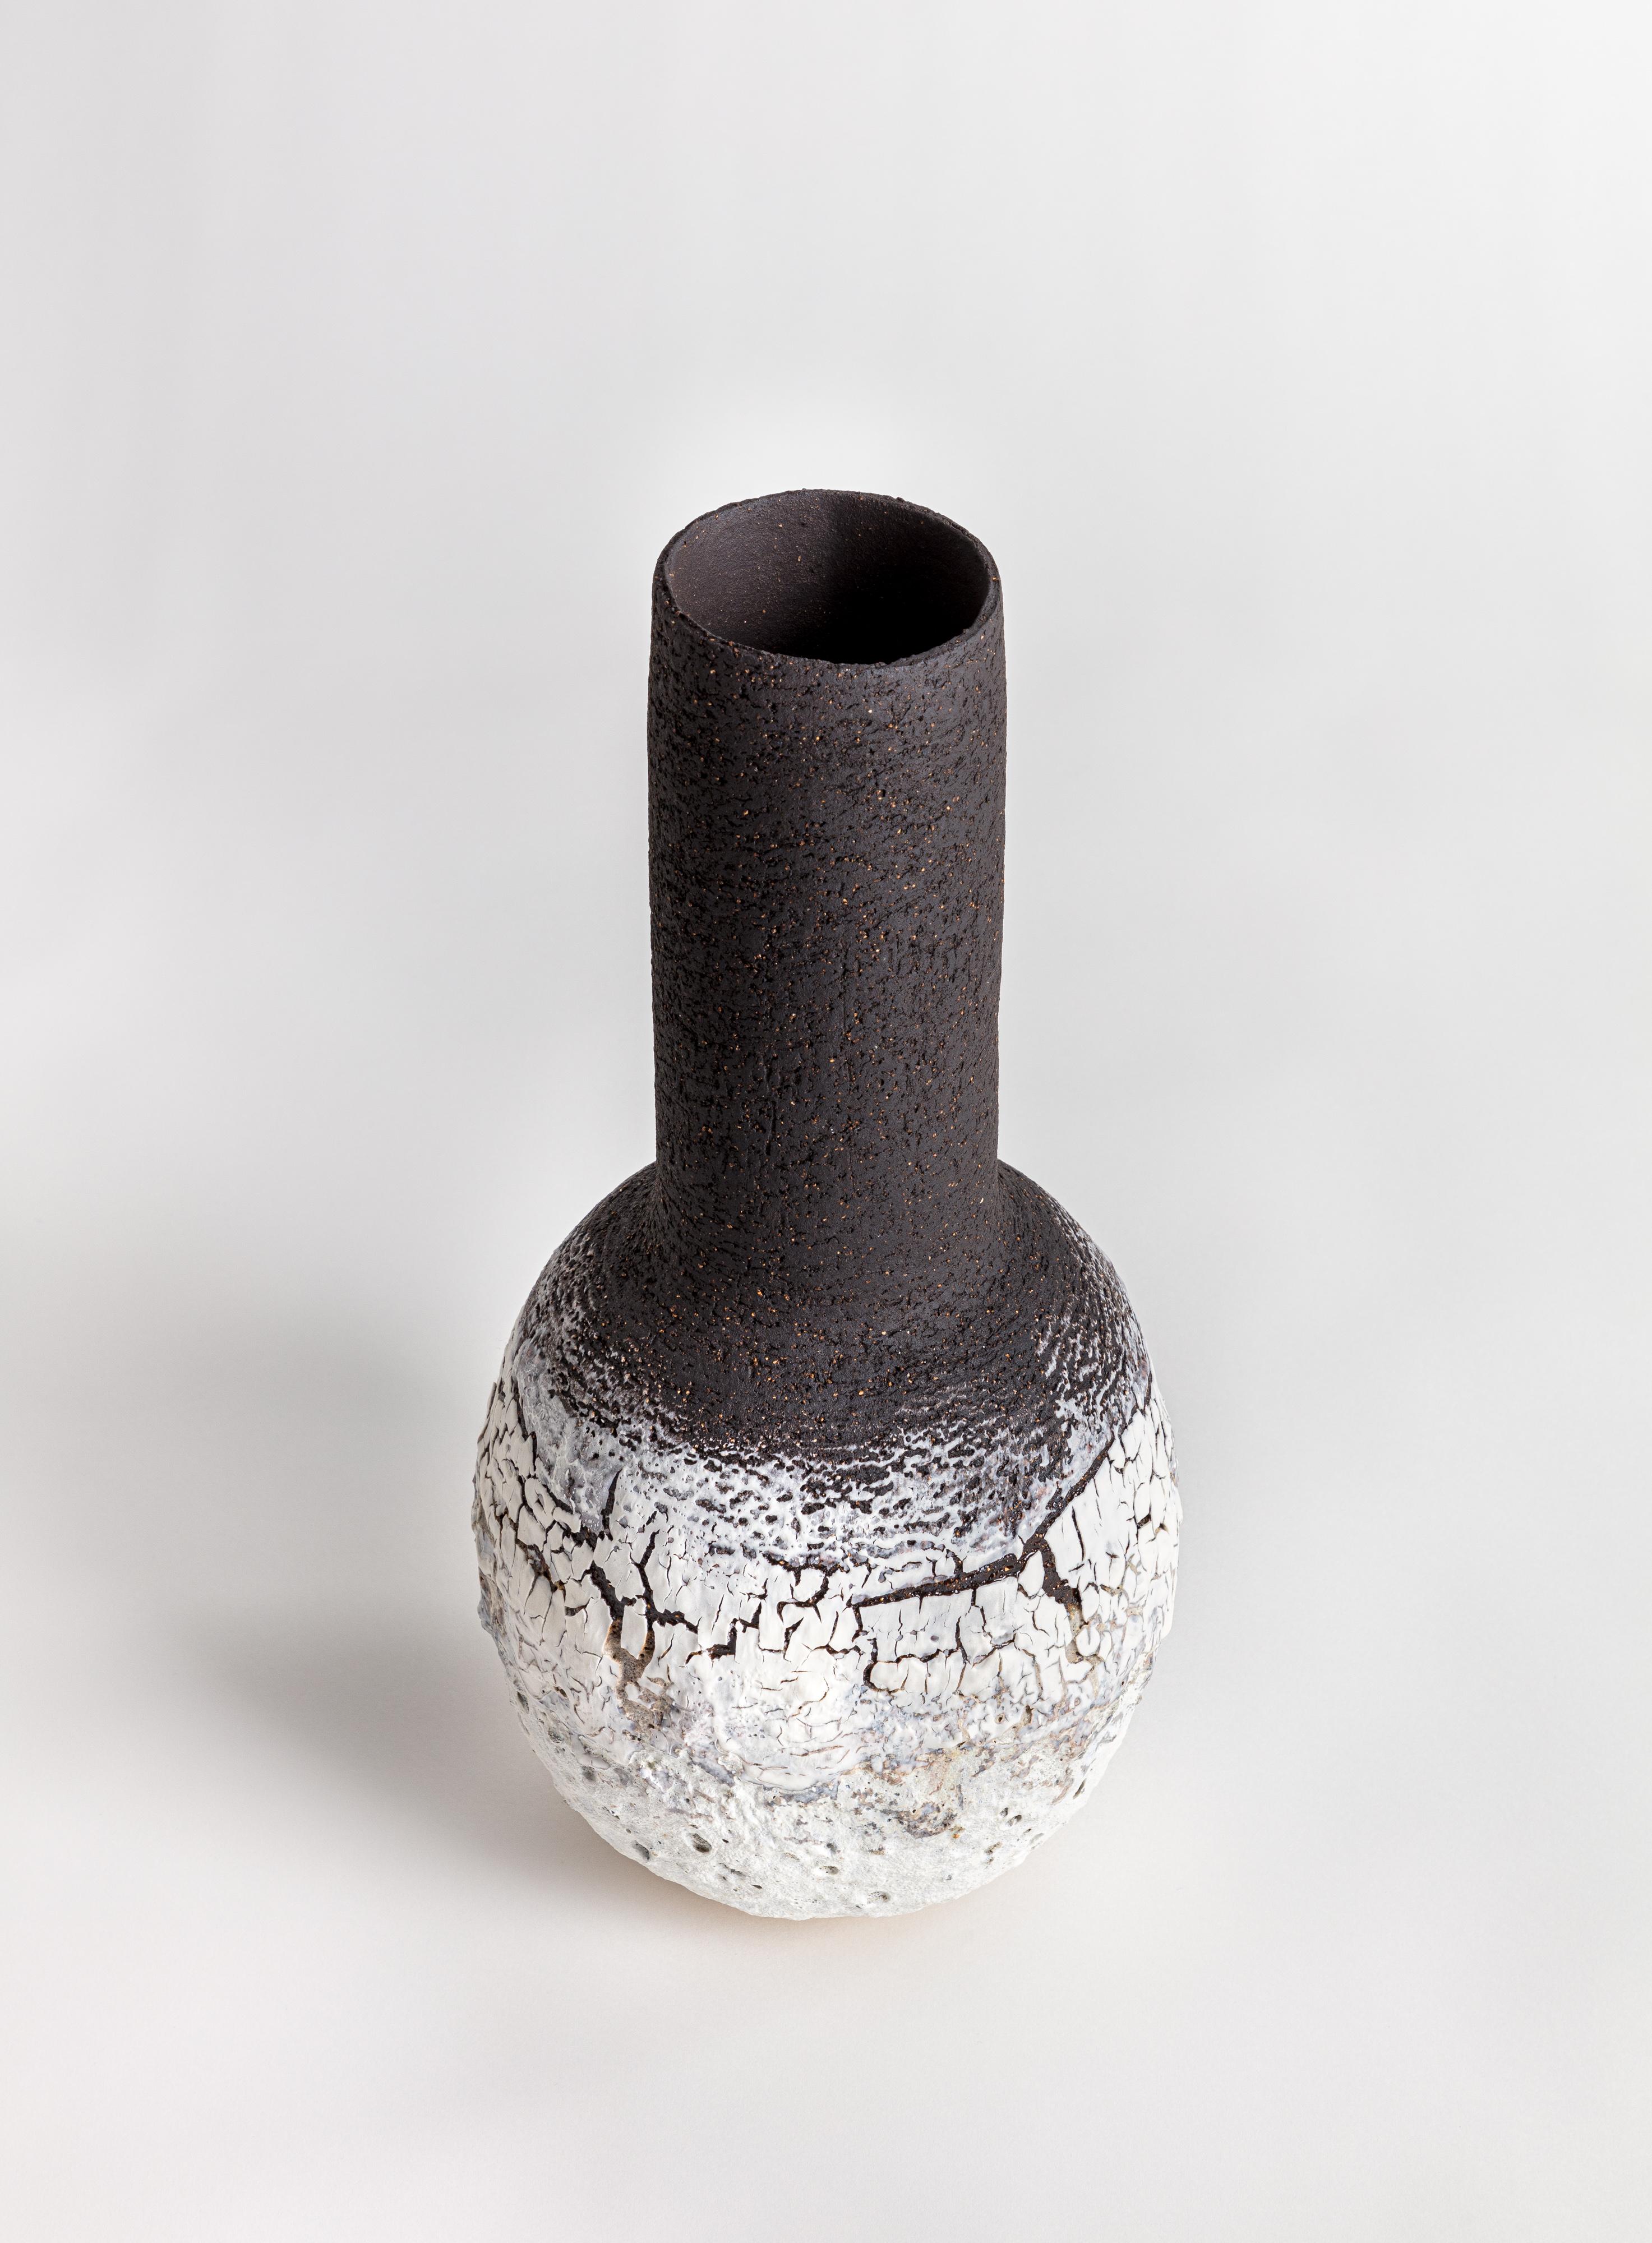 Bottle shaped vase in white and black stoneware clay with porcelain, heavy volcanic textured glaze. There is the option of three different colour ways for commission.

The work is hand built using a combination of stoneware black and buff clays,